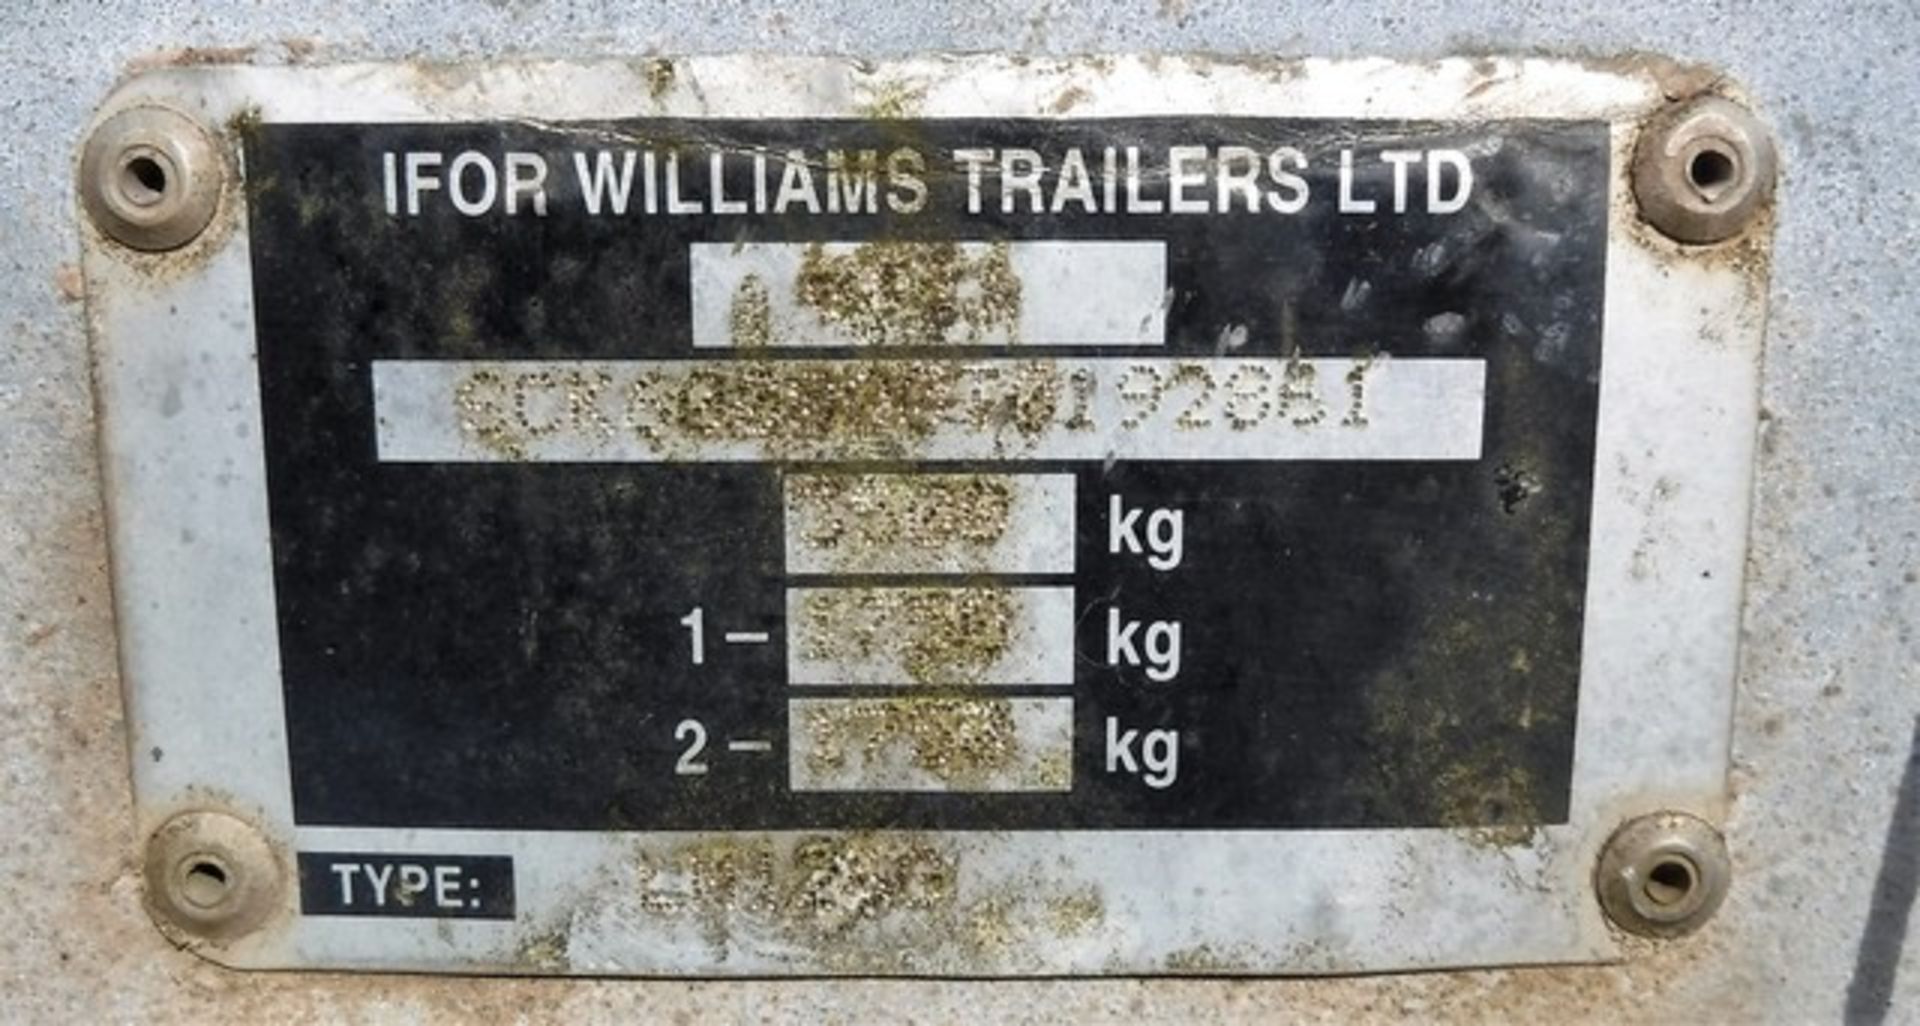 IFOR WILLIAMS TRAILER, 12FT X 6FT, ROAD TRAILER FOR CARRYING SIGN, ASSET T-1G101 - Image 6 of 6